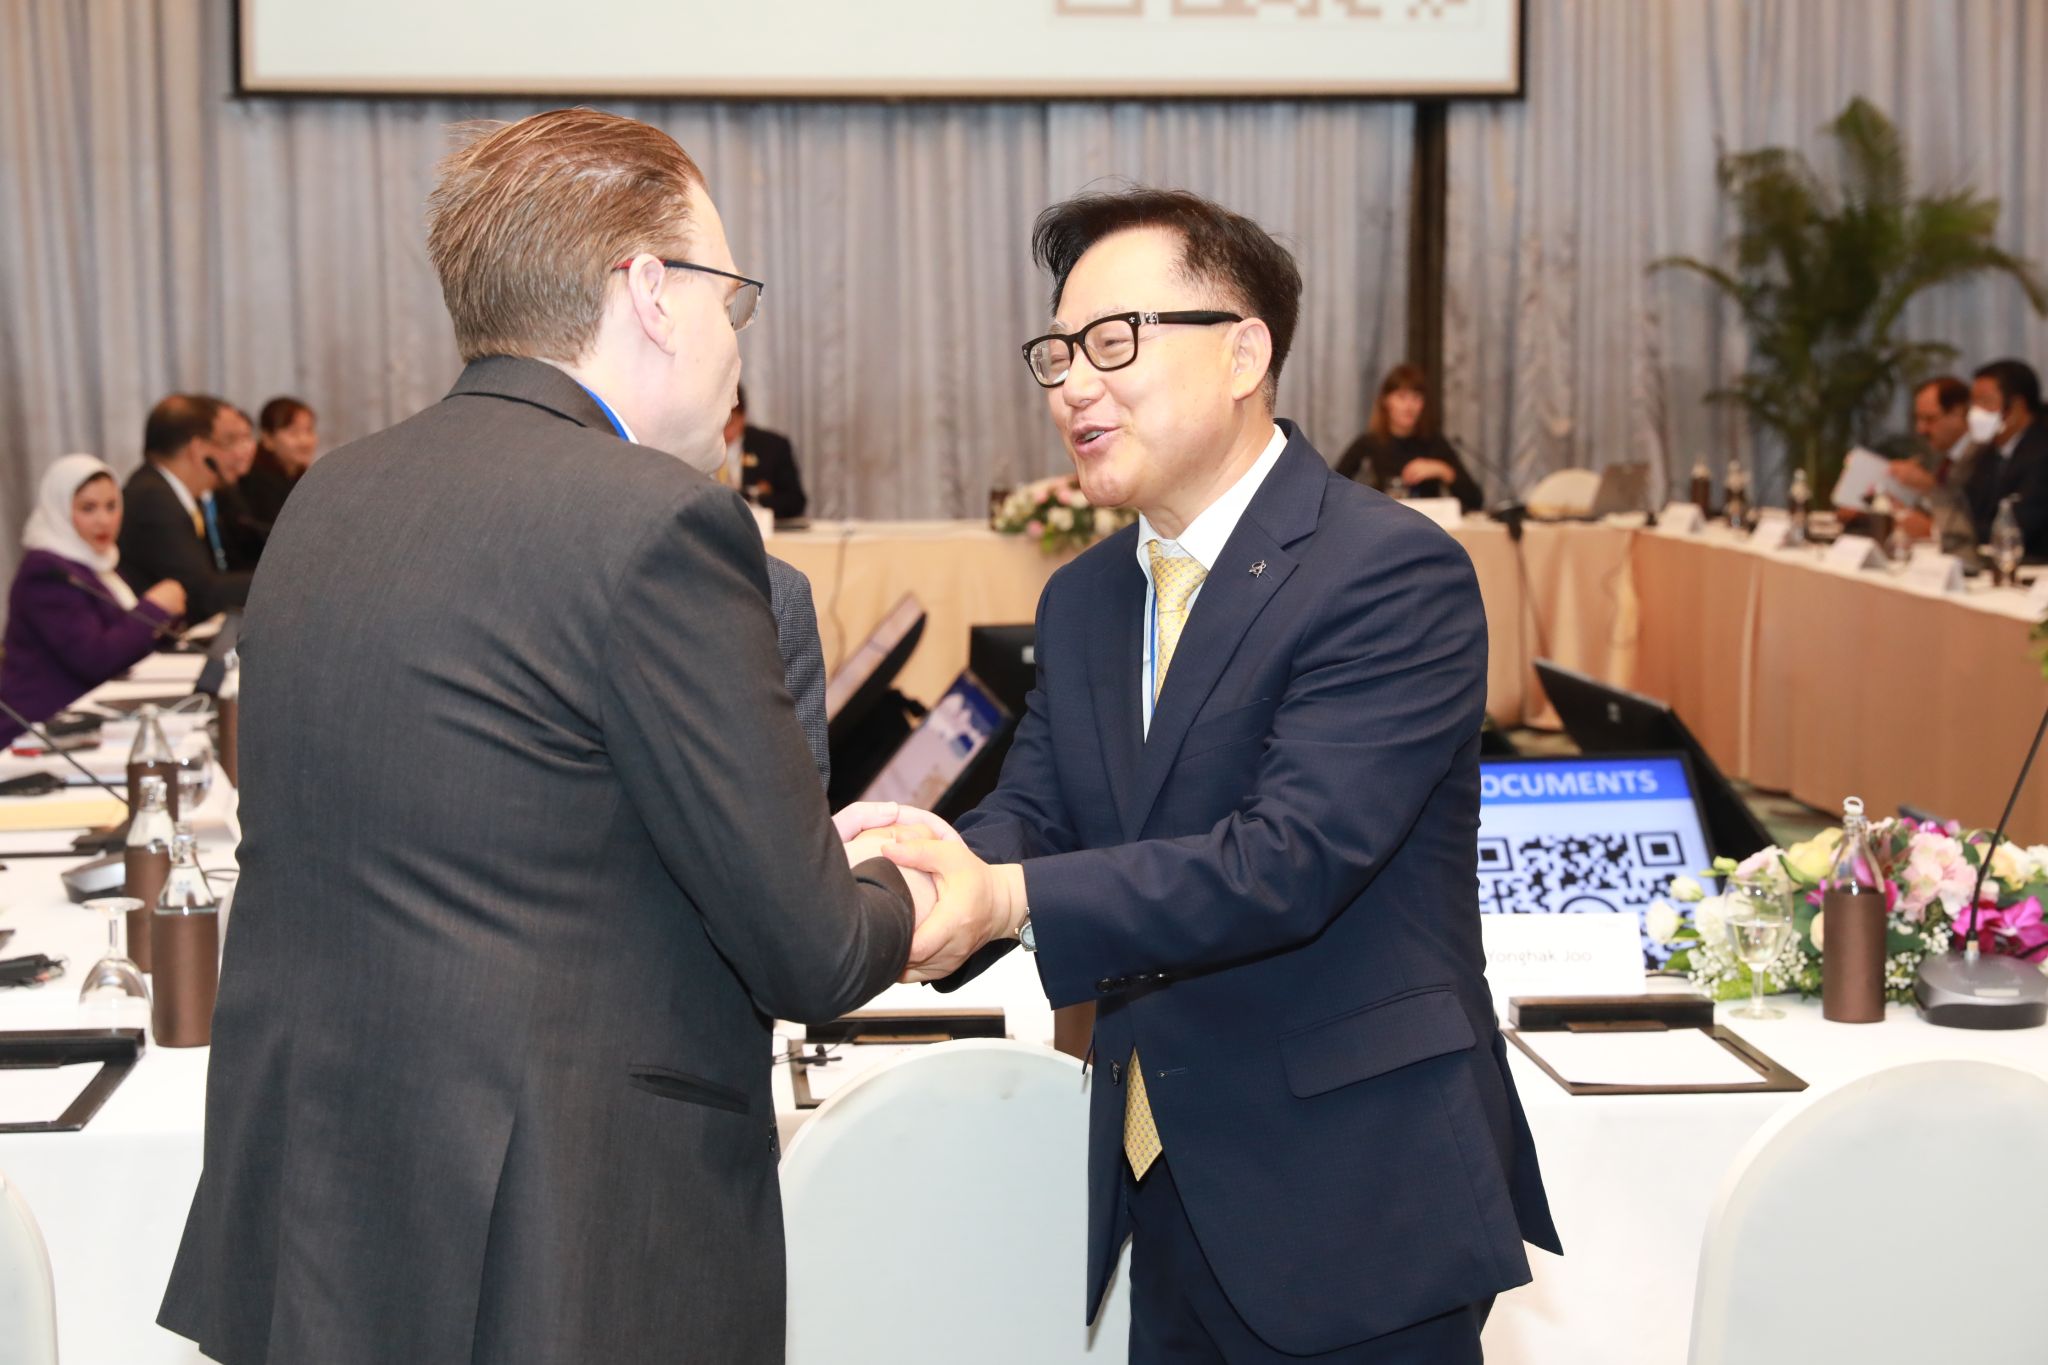 IOI President Chris Field PSM and Chairman of the Seoul Metropolitan Government Citizens’ Ombudsman Commission, Joo Yong-hak at the 2023 Asia Region meeting of the IOI.